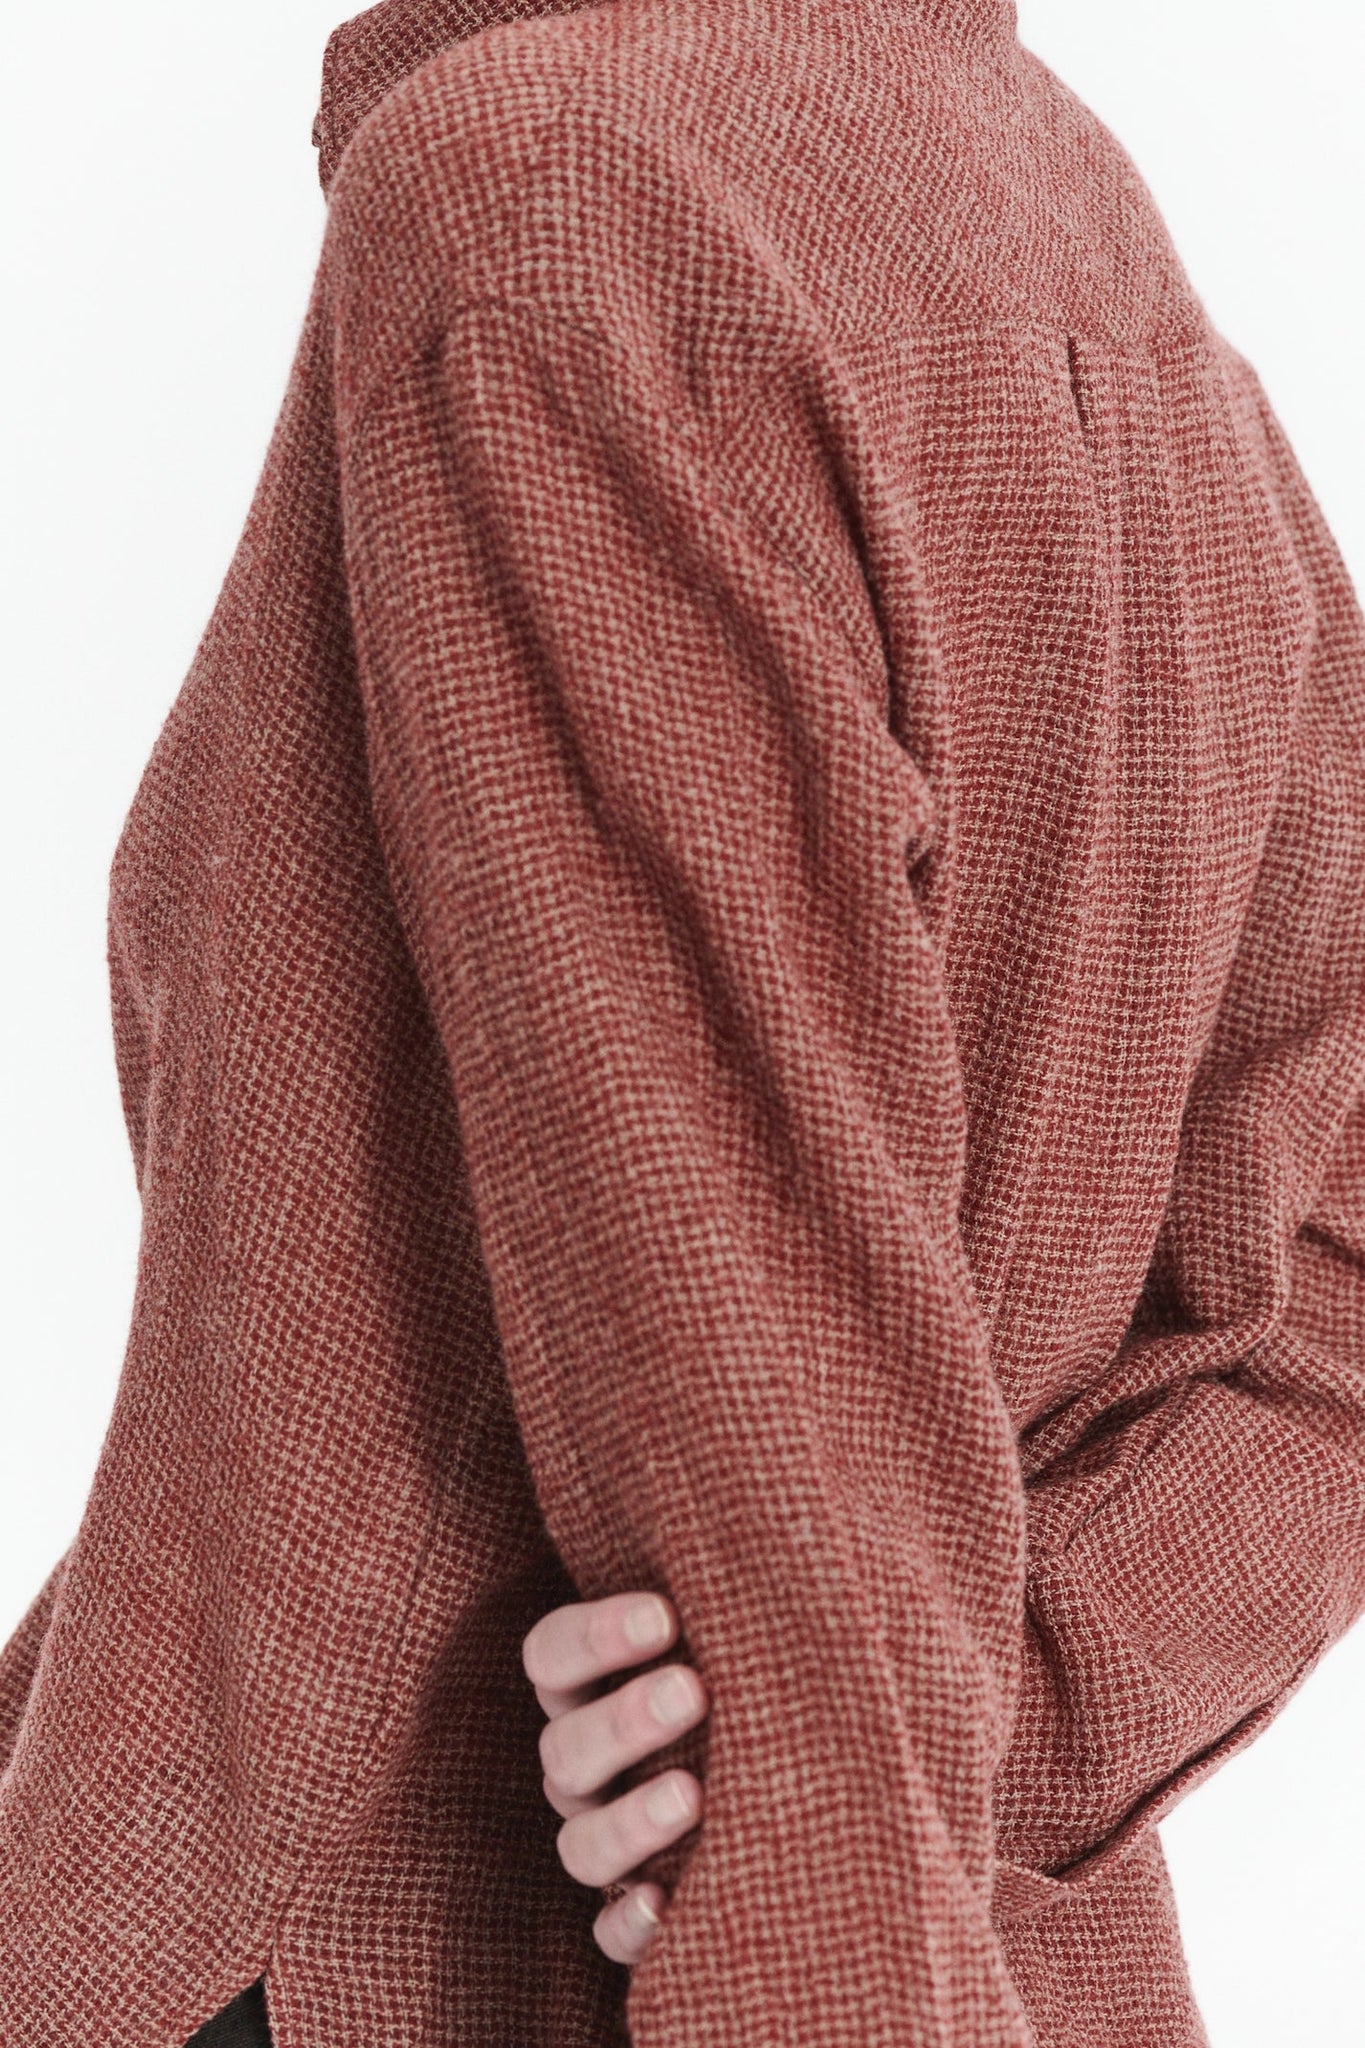 RELAXED CROPPED BLOUSE IN THE FINEST WORSTED WOOL FROM JAPAN